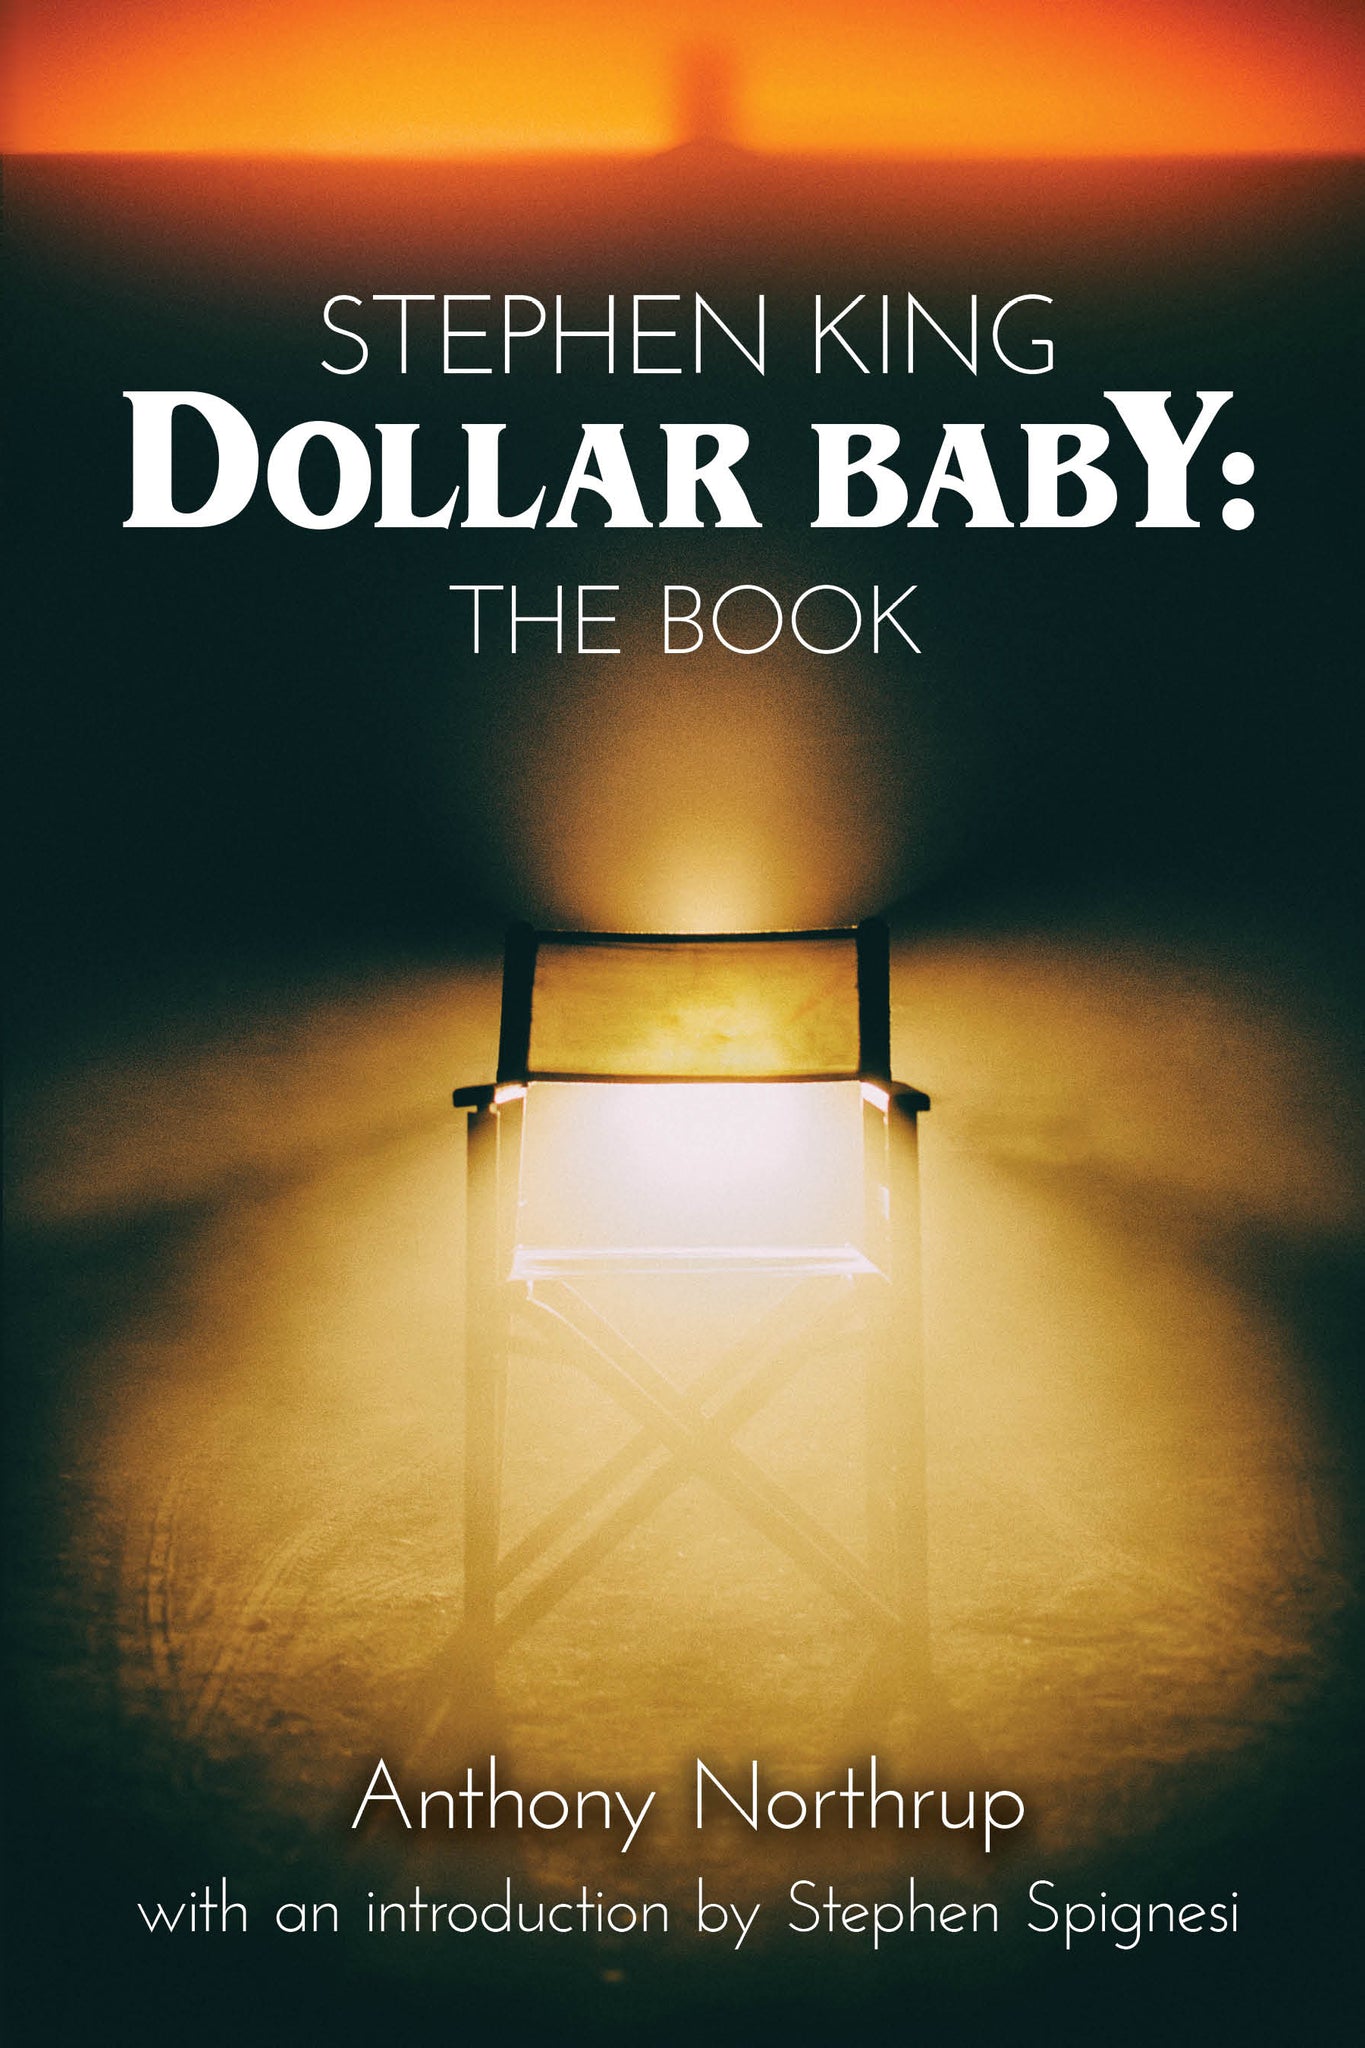 Stephen King - Dollar Baby: The Book (paperback)